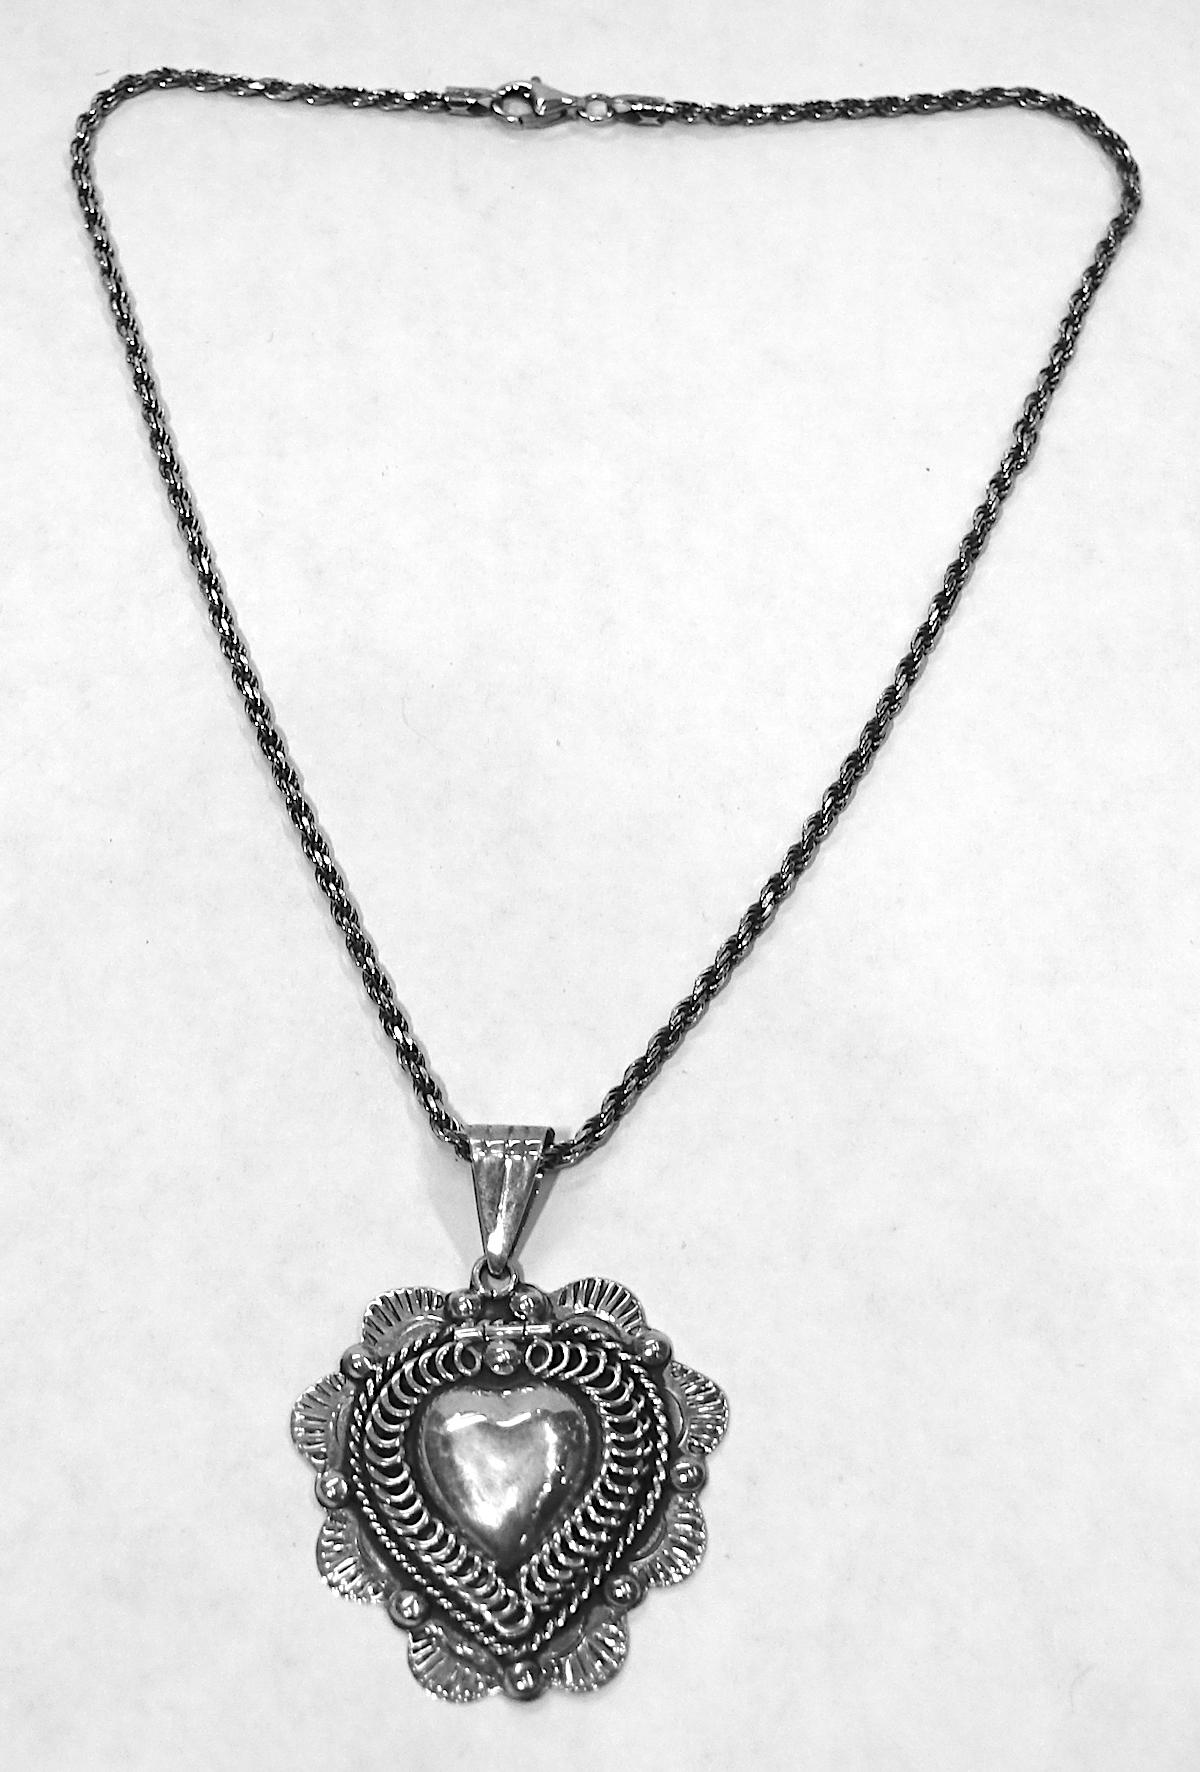 This vintage signed Taxco Mexico sterling silver locket features a heart design that open in the front and is suspended on a sterling silver rope link chain.  The locket measures 1-1/2” x 1-3/8”; the chain measures 16” long with a spring closure x